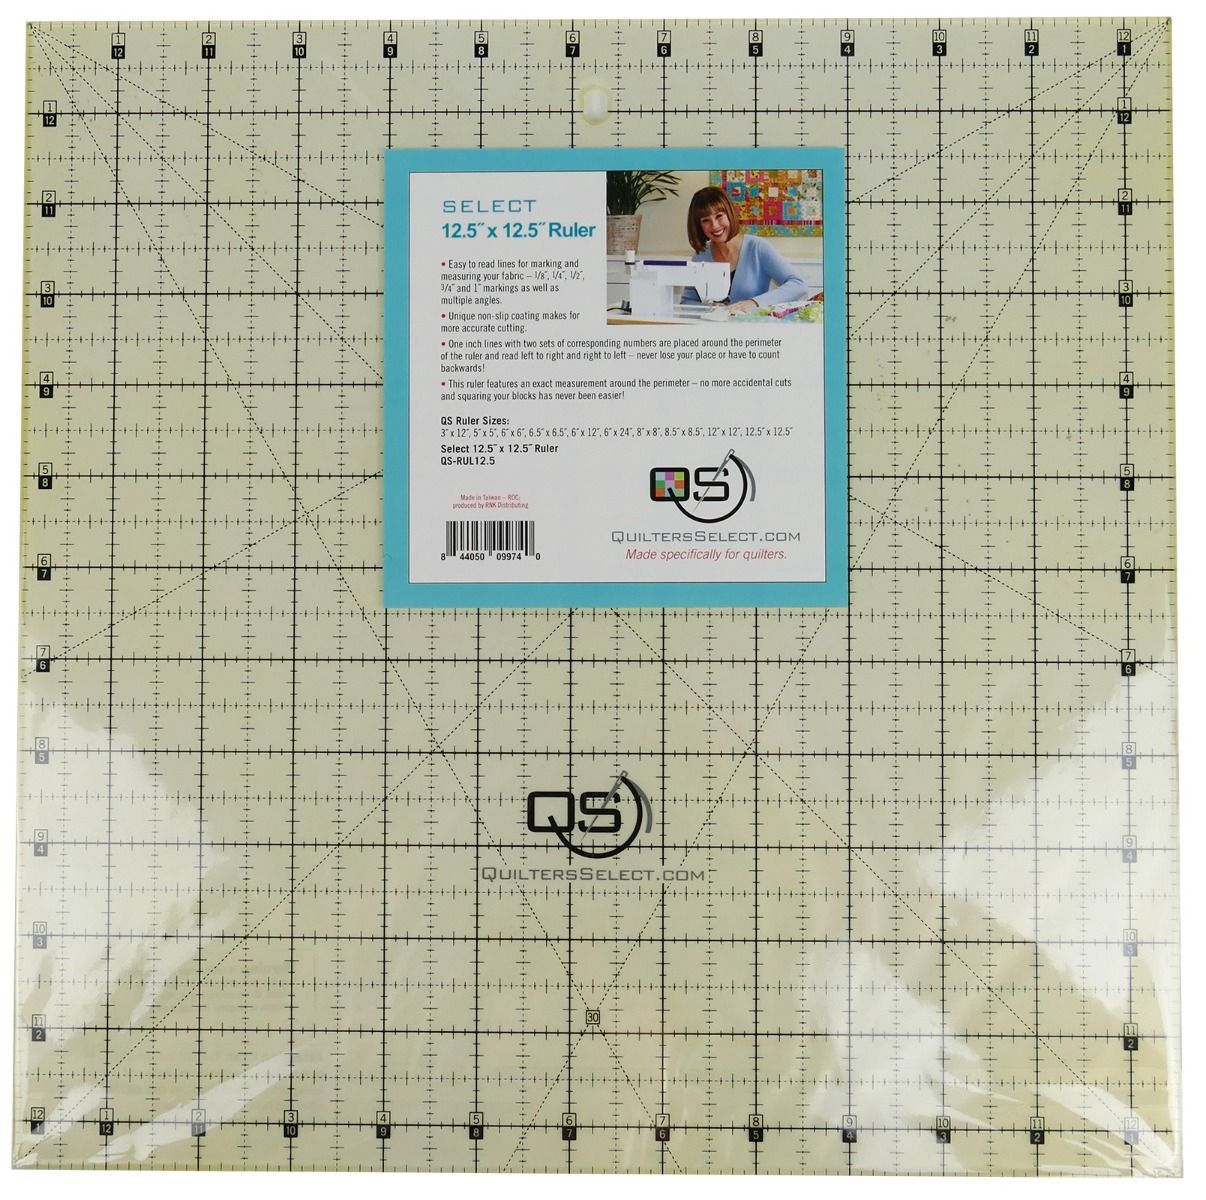 Quilter Select Ruler 12.5"x12.5"